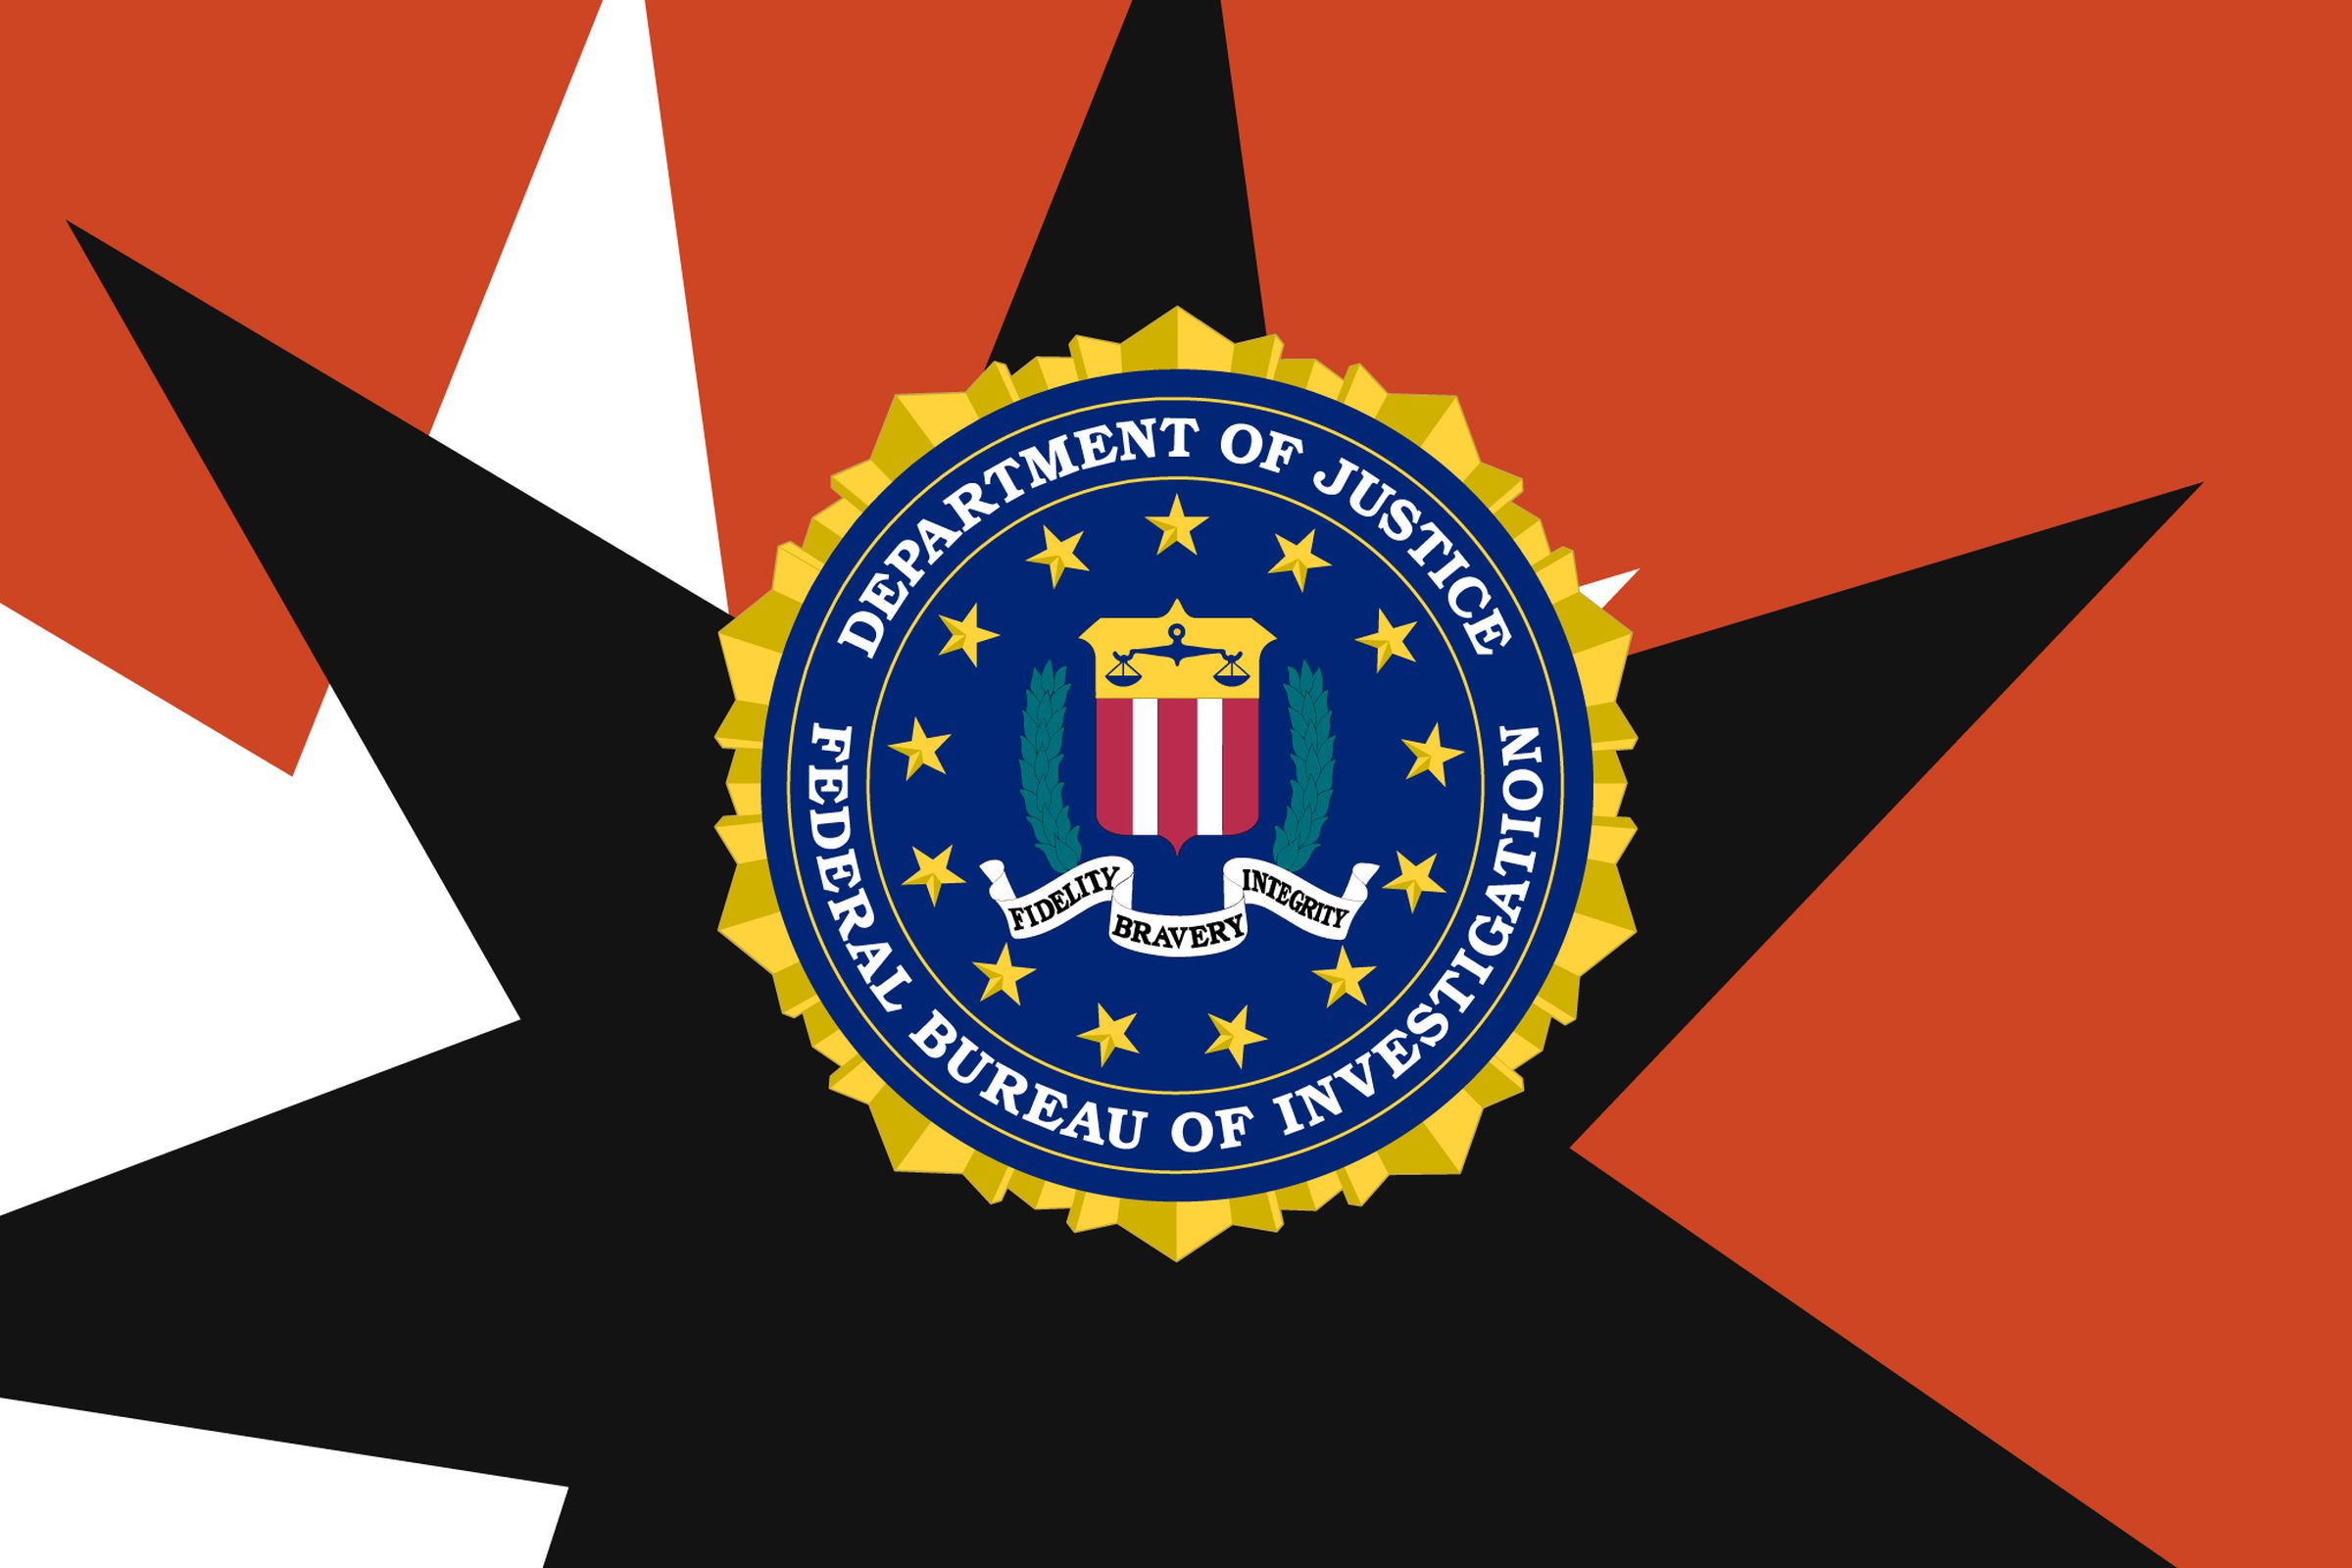 The FBI symbol atop a red, black and white background made of seven pointed stars.